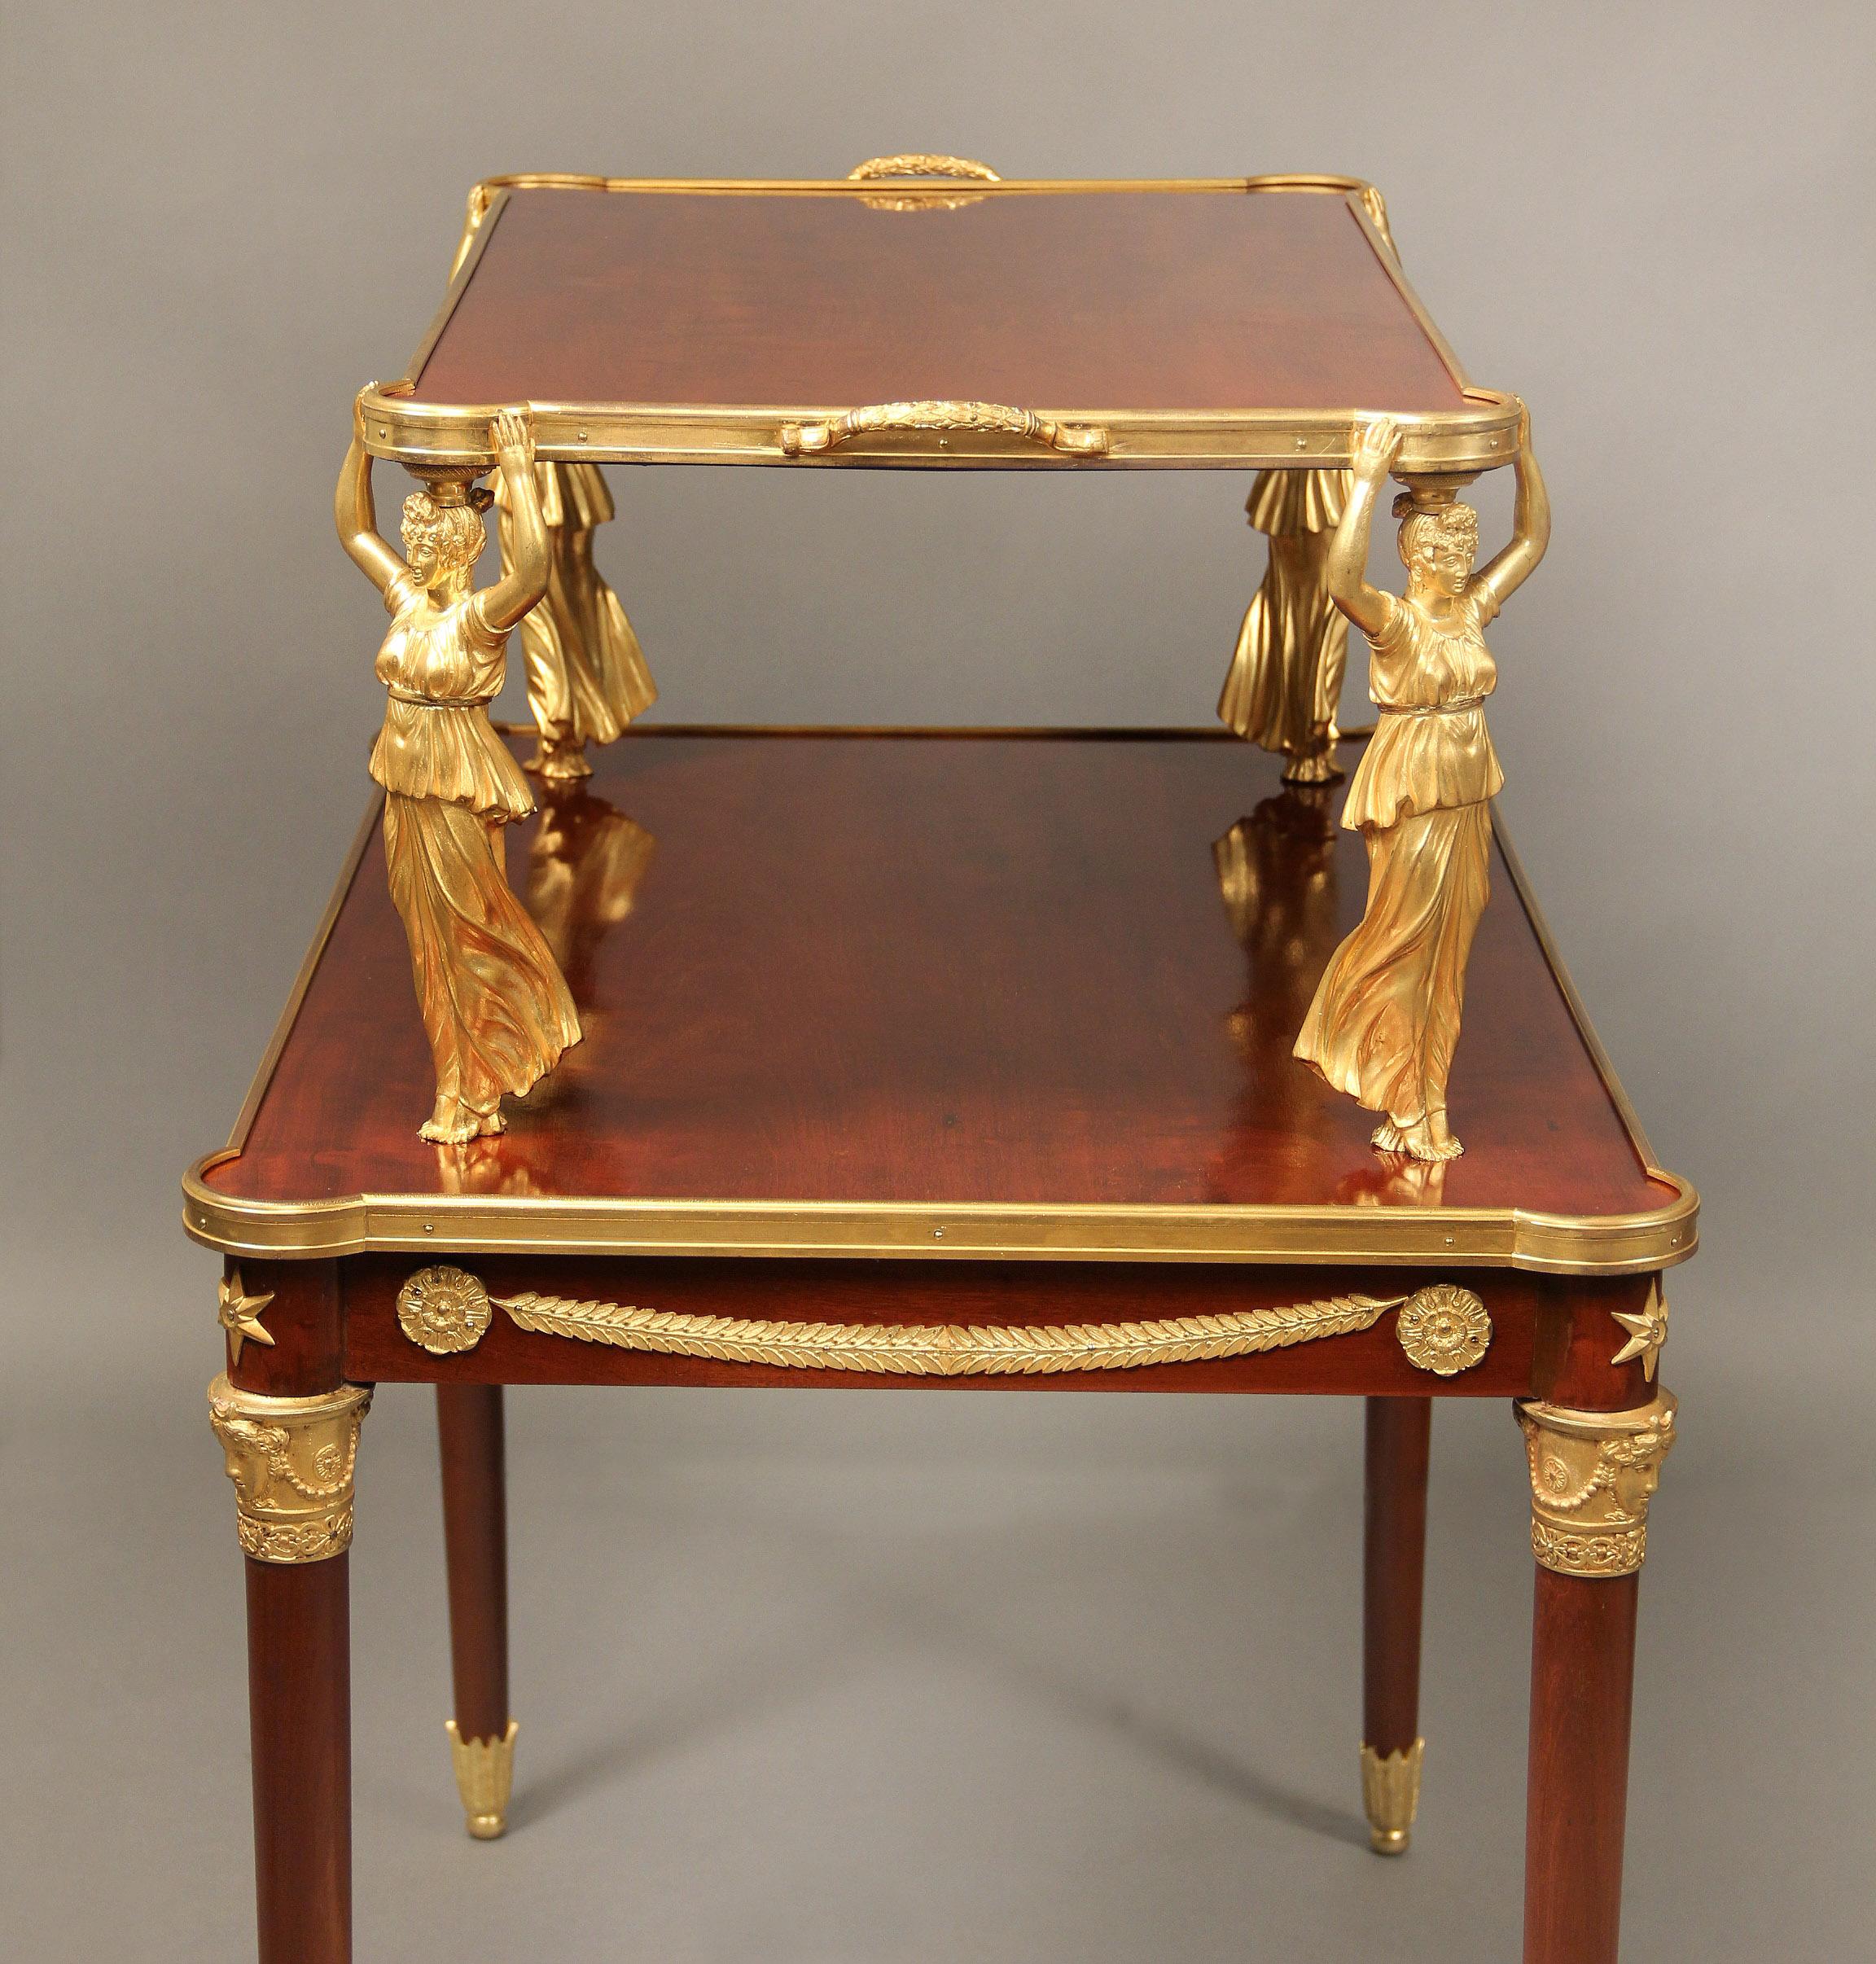 An interesting late 19th century gilt bronze mounted Empire style tea table

The rectangular two-tier table supported by four scantily clad female bronze figures, each leg adorned with a star and female masks.